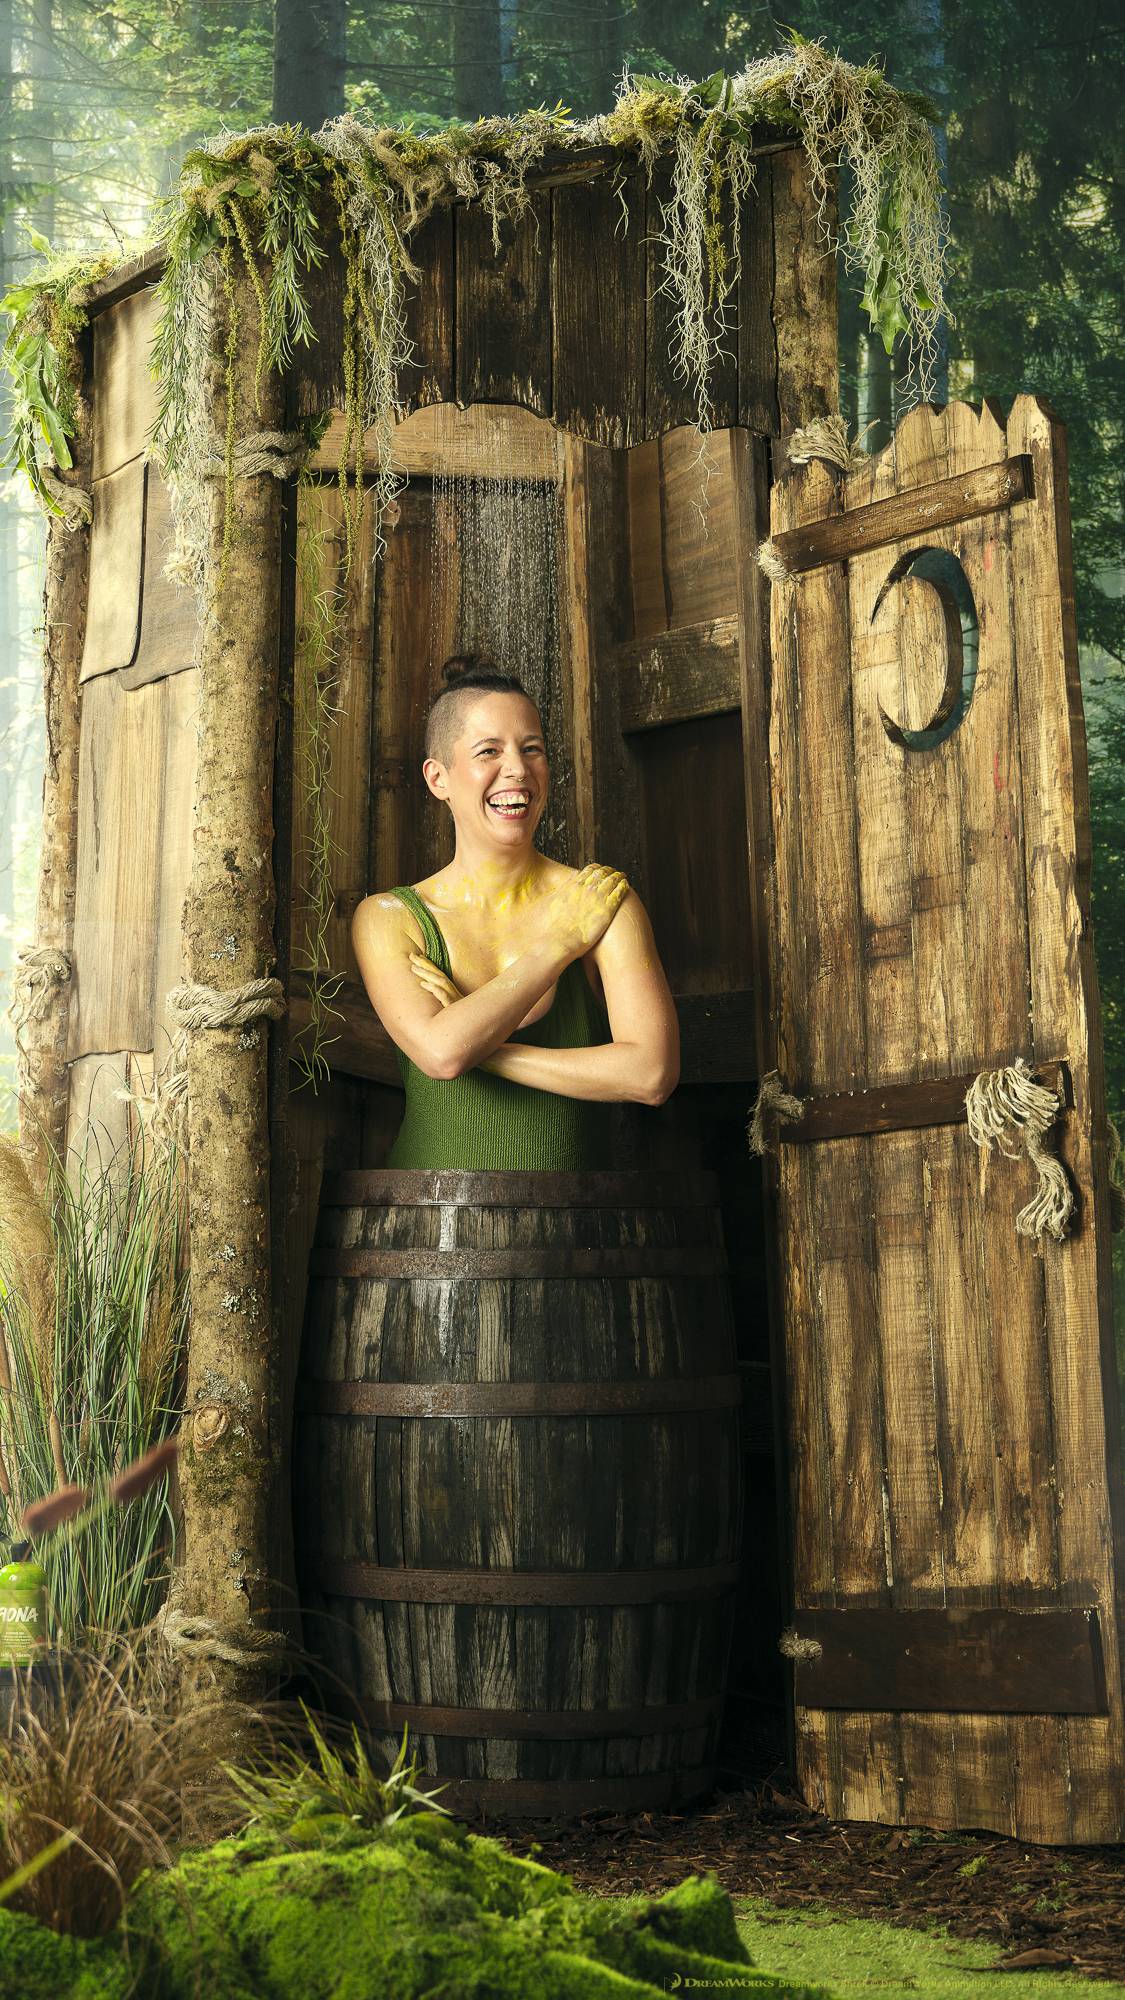 The model is in a green swimsuit while showering with the shower gel in a wooden barrel inside the iconic wonky, wooden outhouse from the Shrek films. It is surrounded by forest trees and moss. 